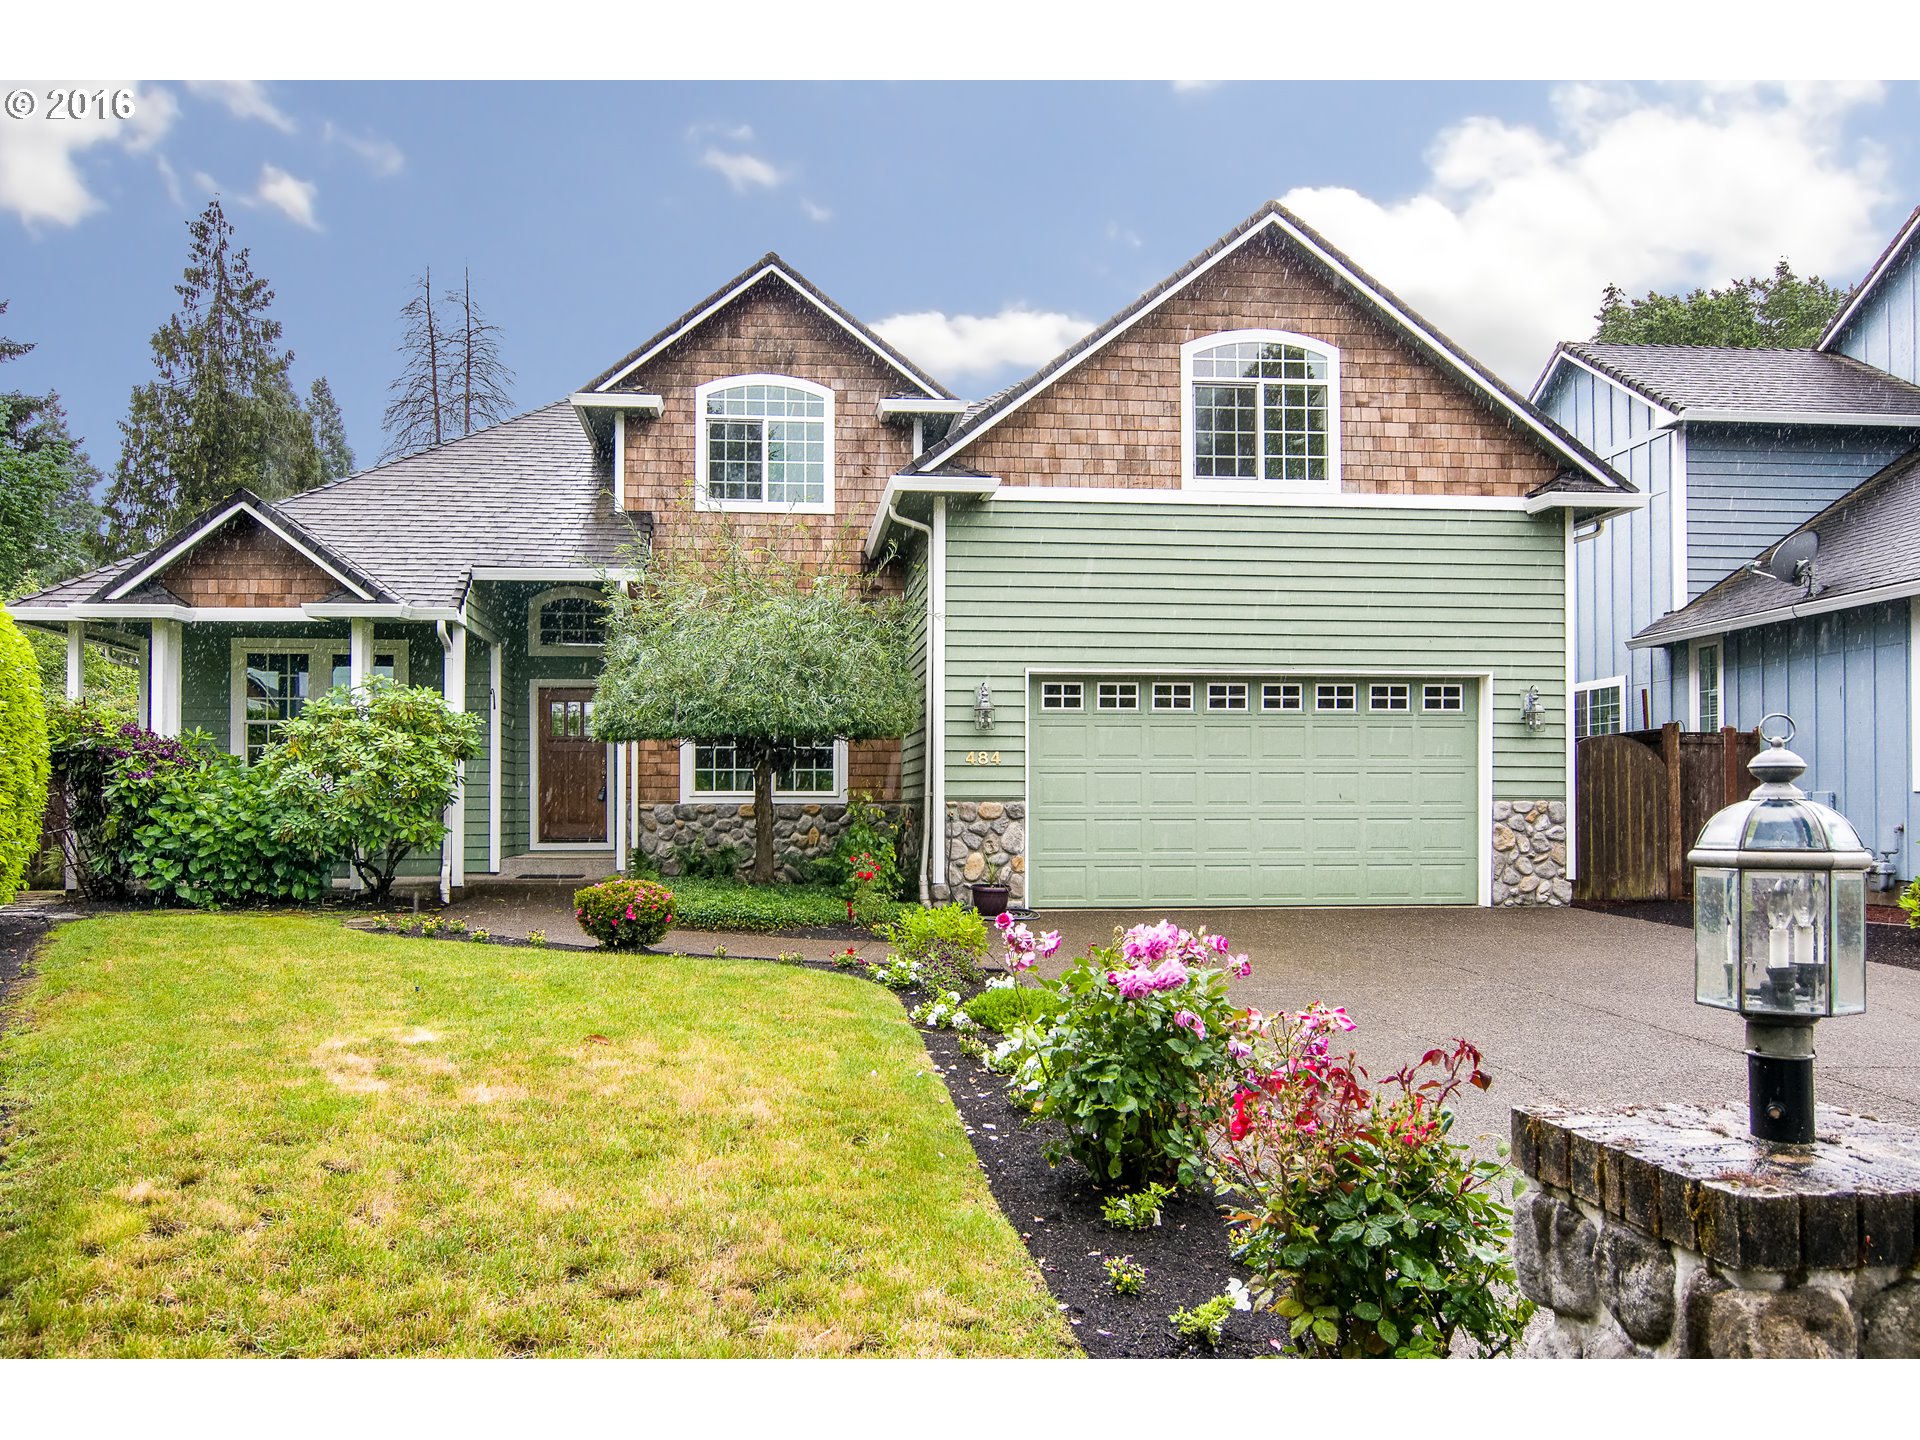 484 EMILY LN Eugene Home Listings - Real Pro Systems Real Estate Marketing